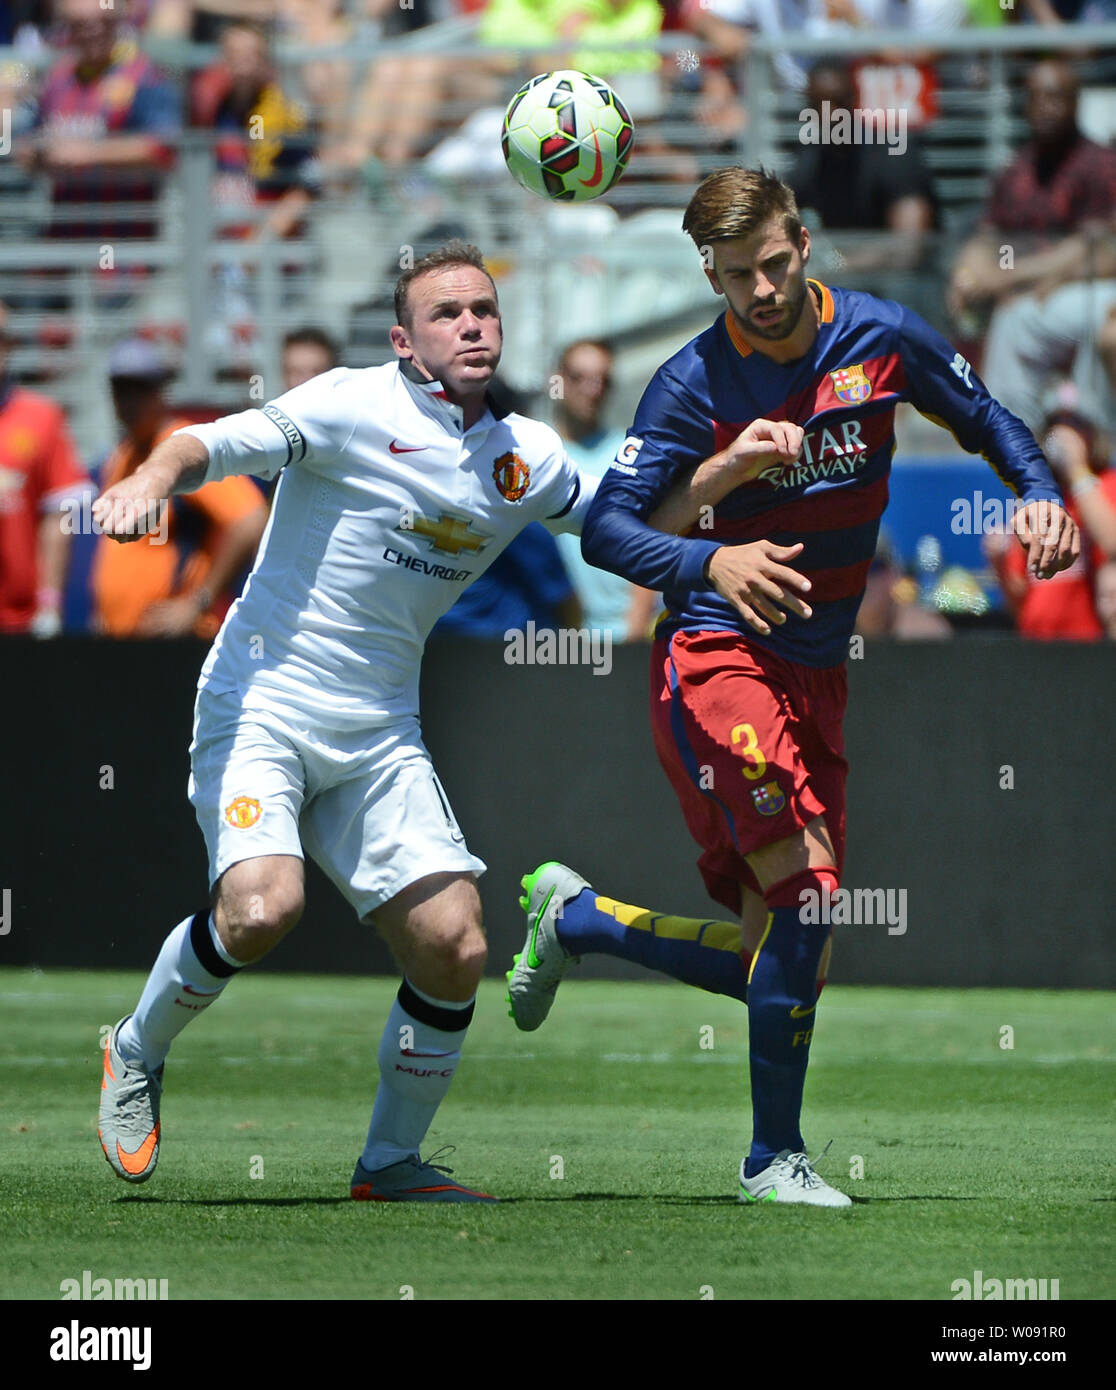 Manchester United's Wayne Rooney (L) fights for the ball with FC Barcelona's  Gerard Pique (3) in the first half in the 2015 International Champions Cup  North America at Levi's Stadium in Santa